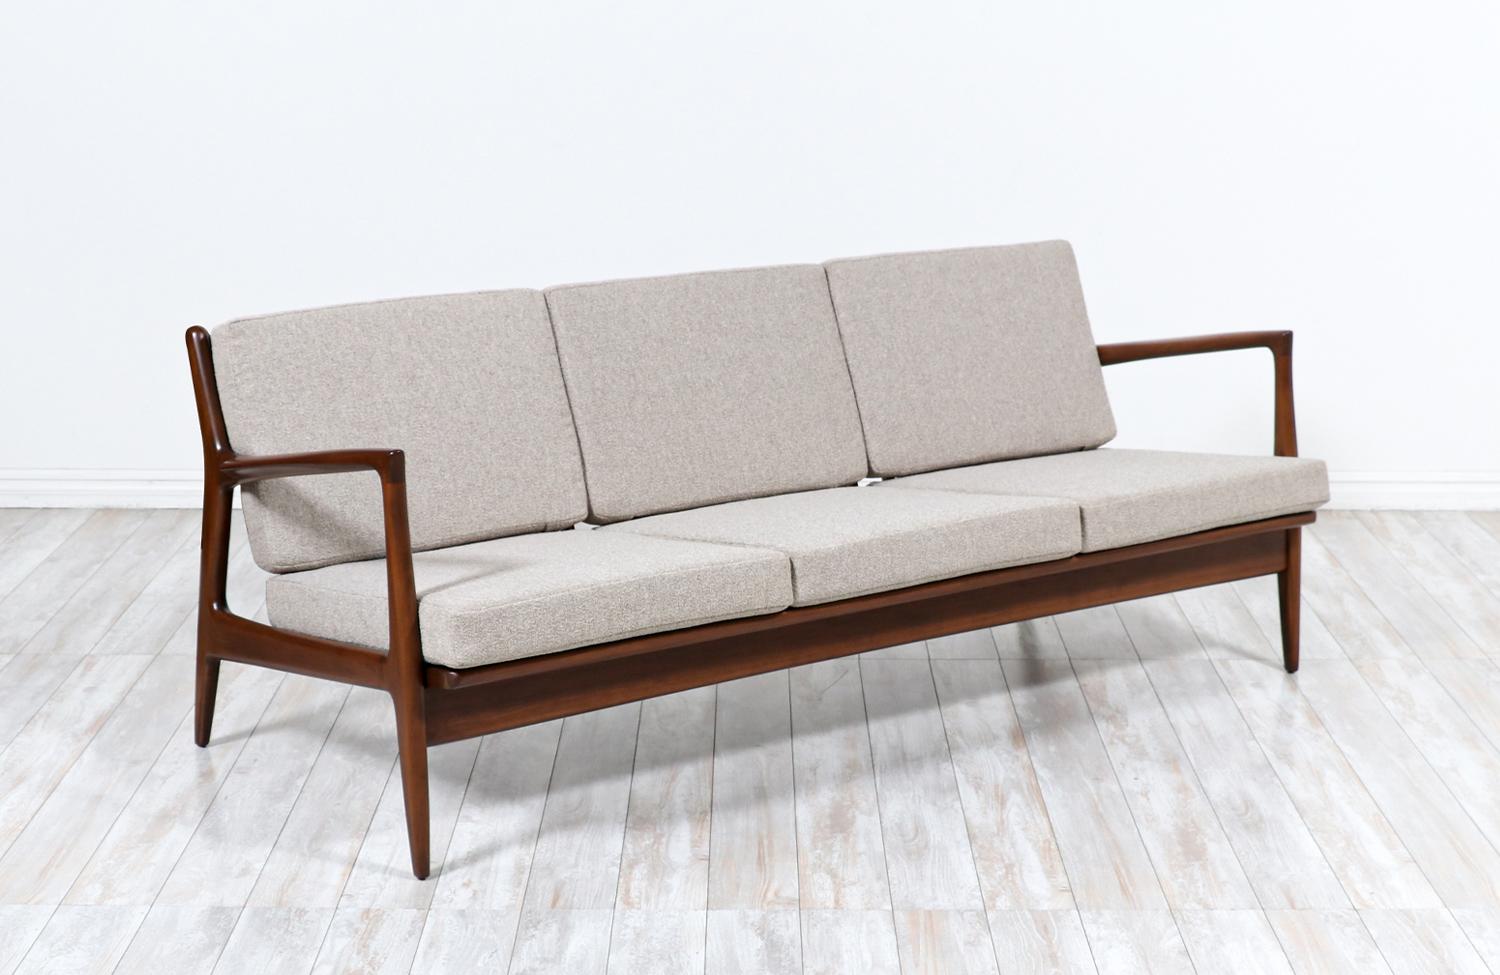 Stylish modern sofa designed by Danish architect and furniture designer Ib-Kofod Larsen for Selig in Denmark circa 1960s. This elegant sofa features a solid sculpted walnut-stained Beechwood frame with vertical slats at the back to create a sleek